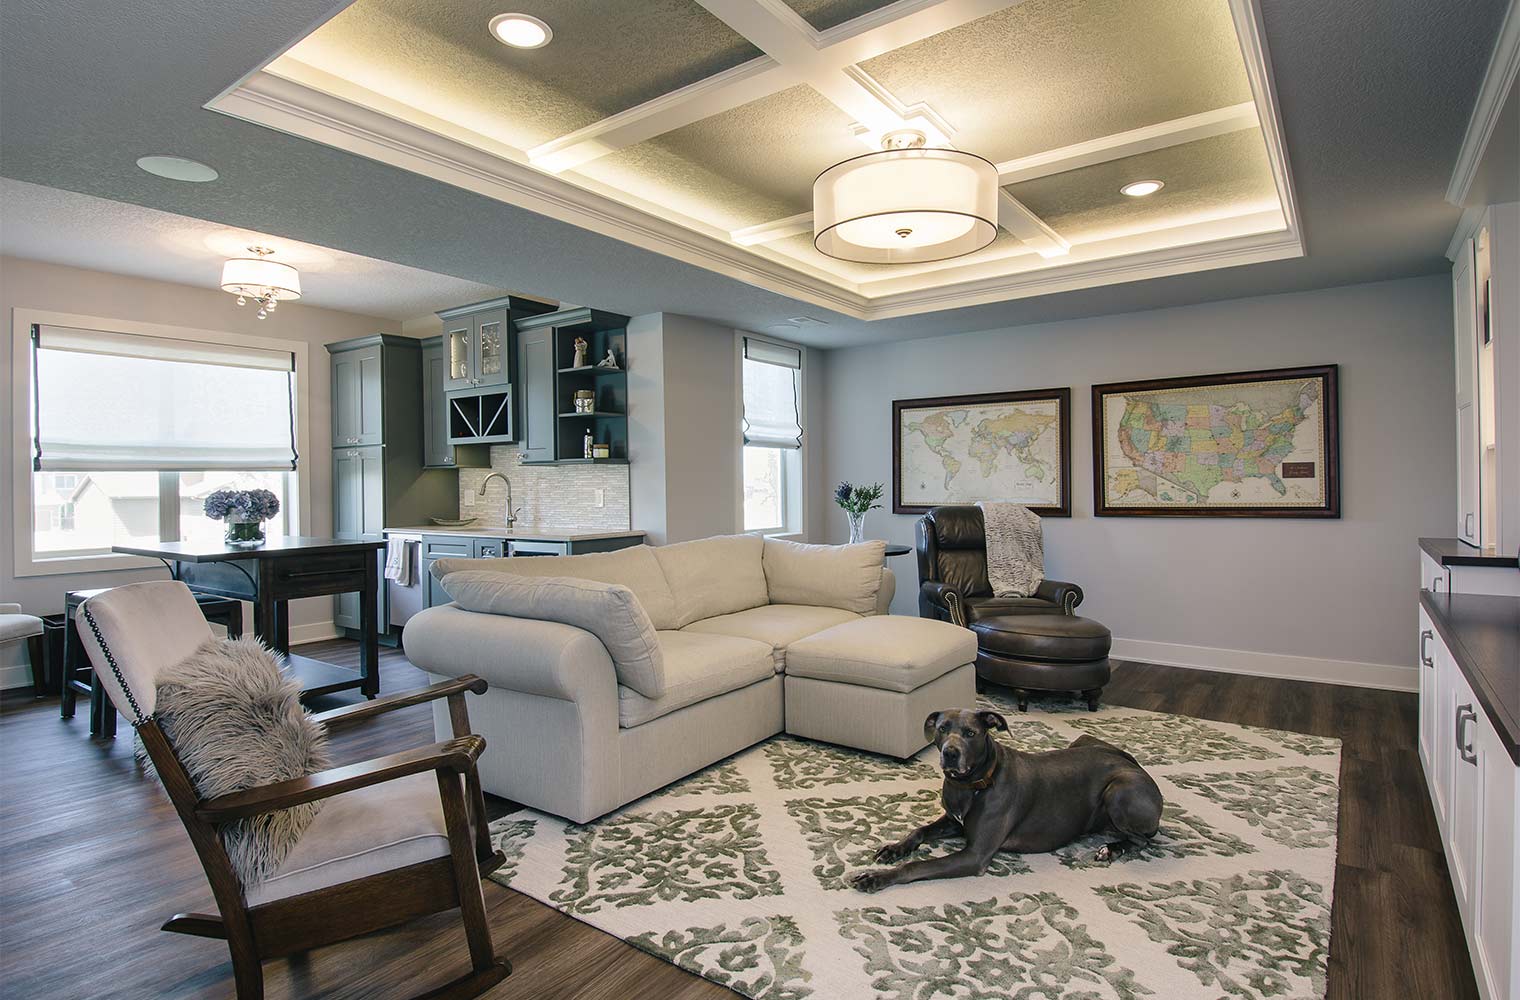 Clive IA basement remodel by Silent Rivers shows family dog enjoying the new family room